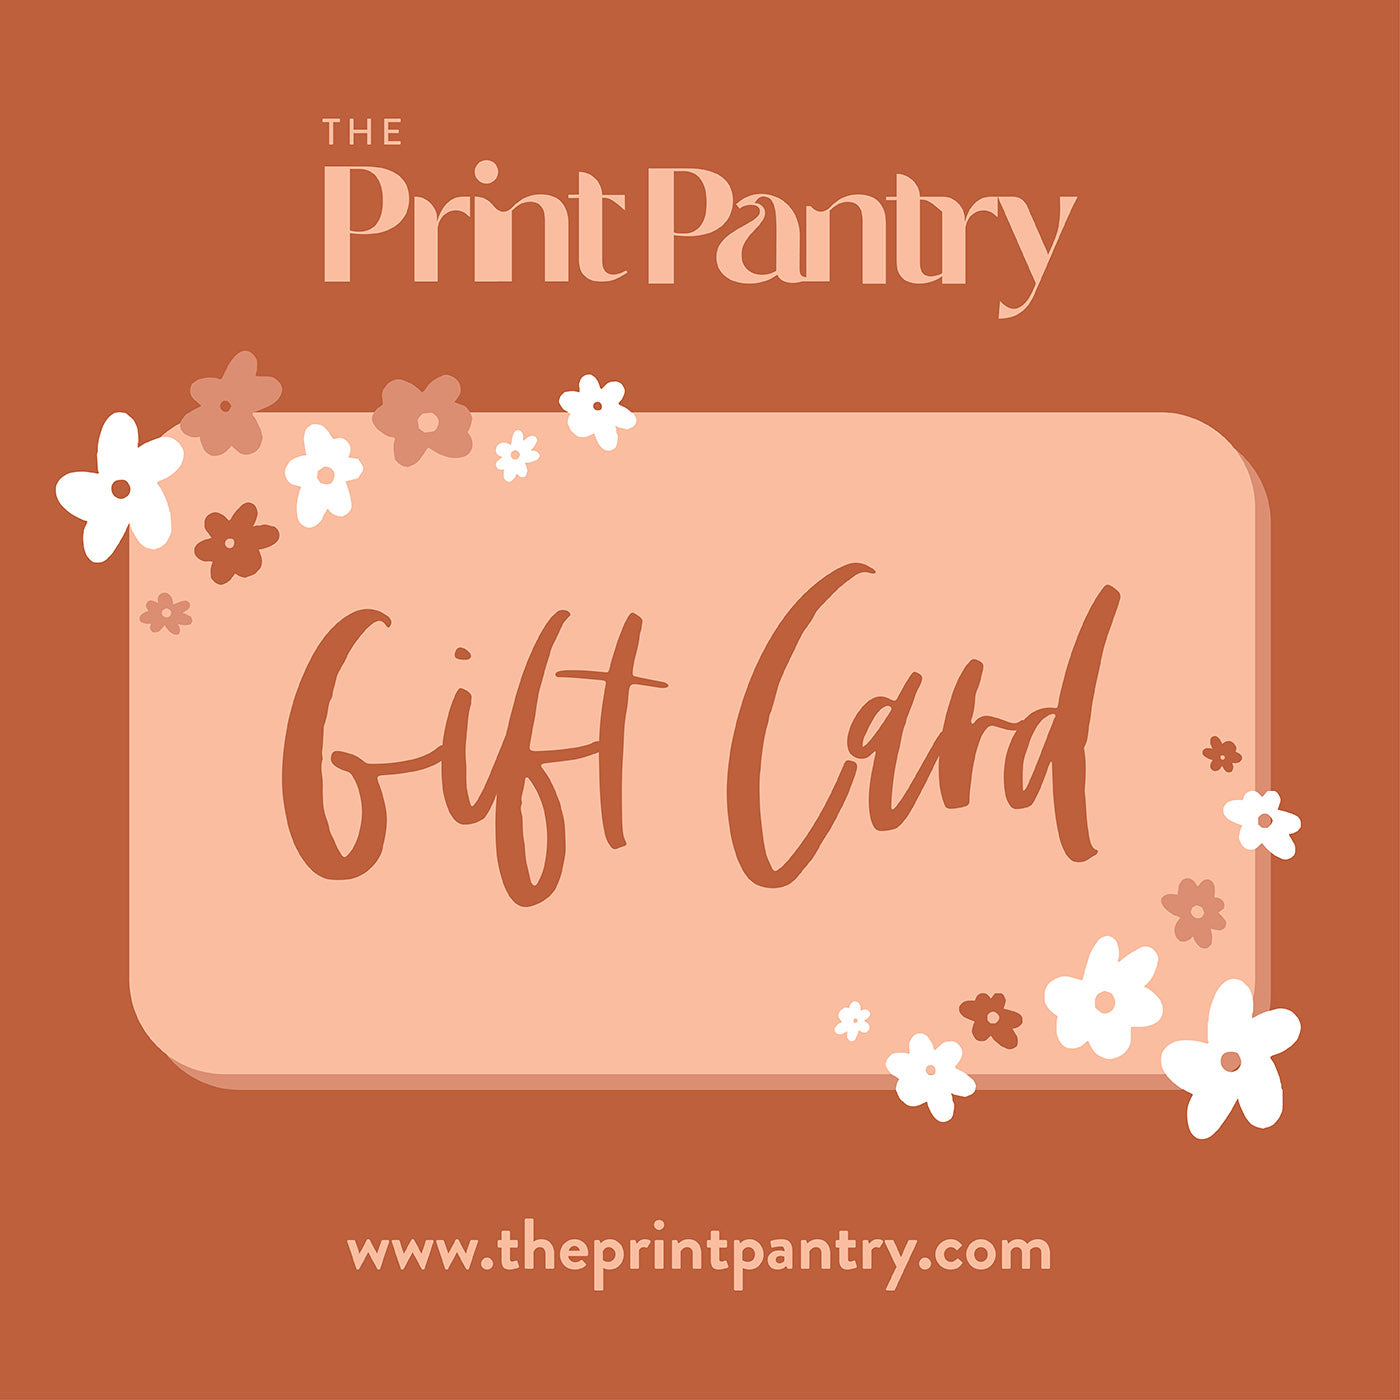 The Print Pantry Gift Card